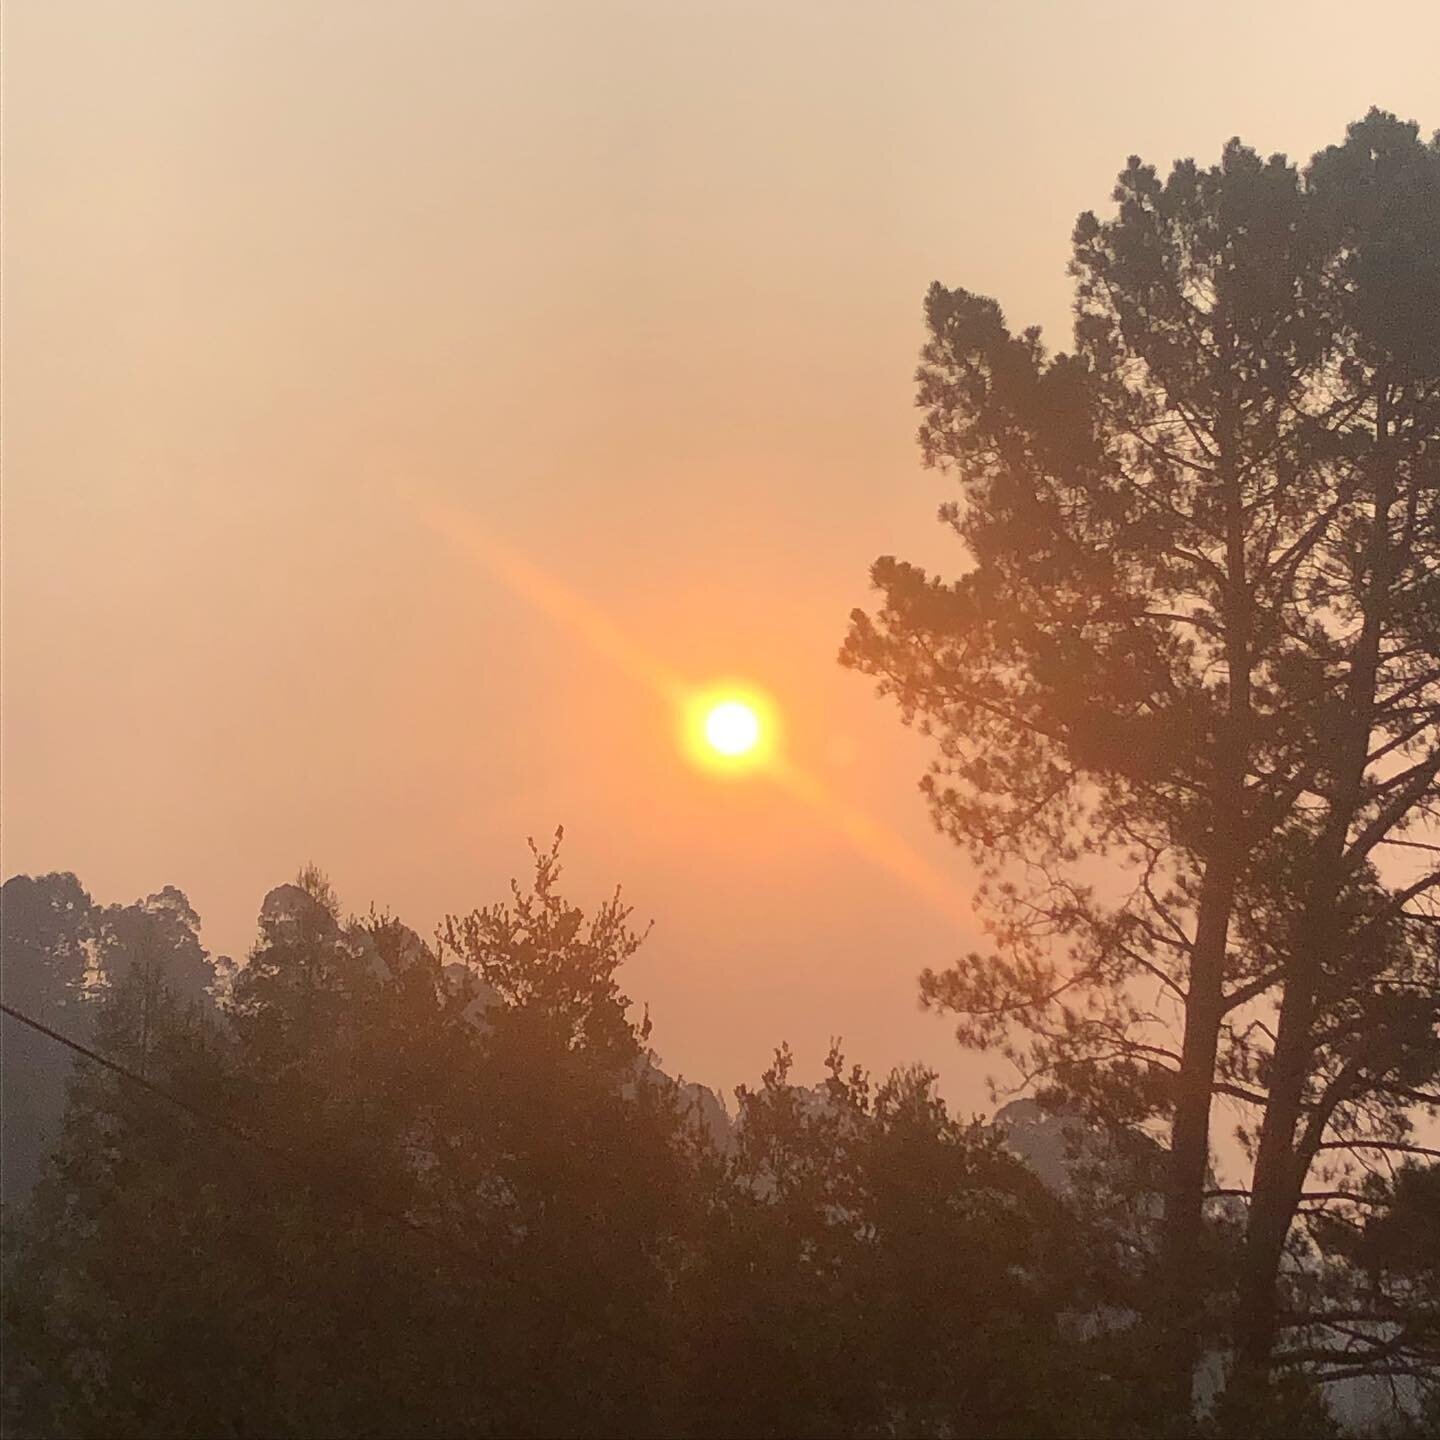 Day 6: Still alive.

Big hugs to those who also stayed up all night watching the storm to see if they needed to re-evacuate.

Big hugs to those who are watching from afar and have offered love, shelter, or support to anyone experiencing the fires.

B